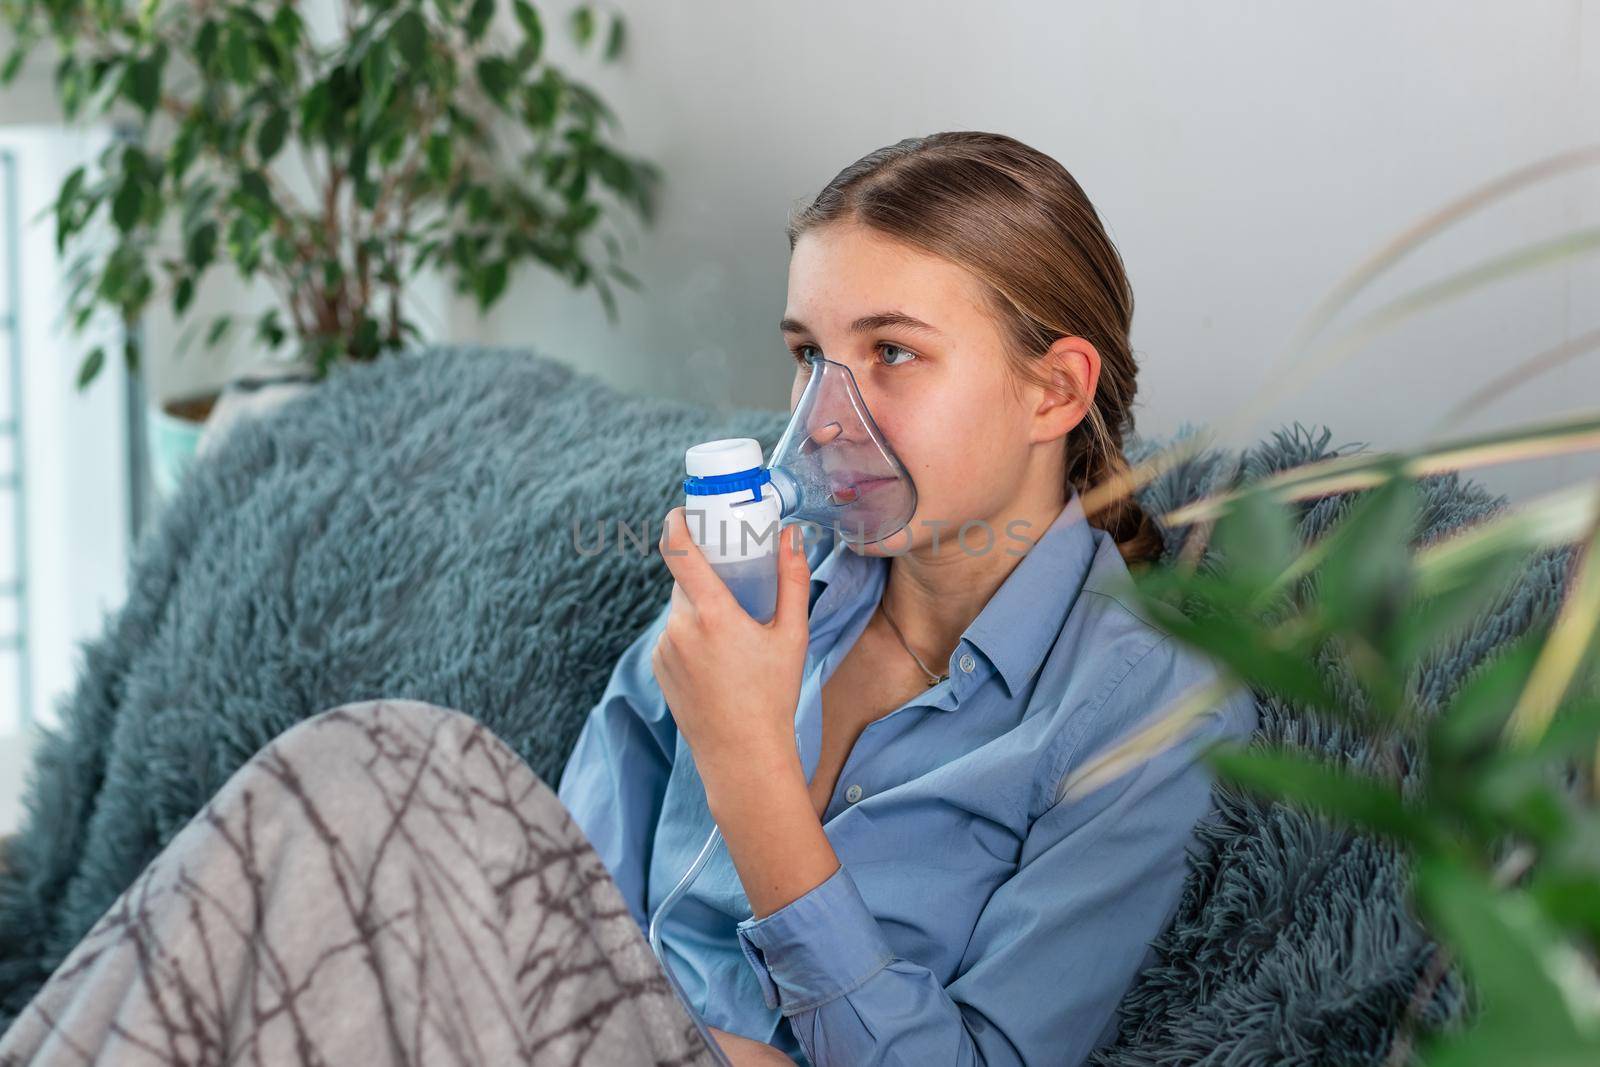 Teenage girl makes inhalation with a nebulizer equipment. Sick child holding inhalator in hand and breathes through an inhaler at home. Physical therapy for cold, flu and bronchial asthma